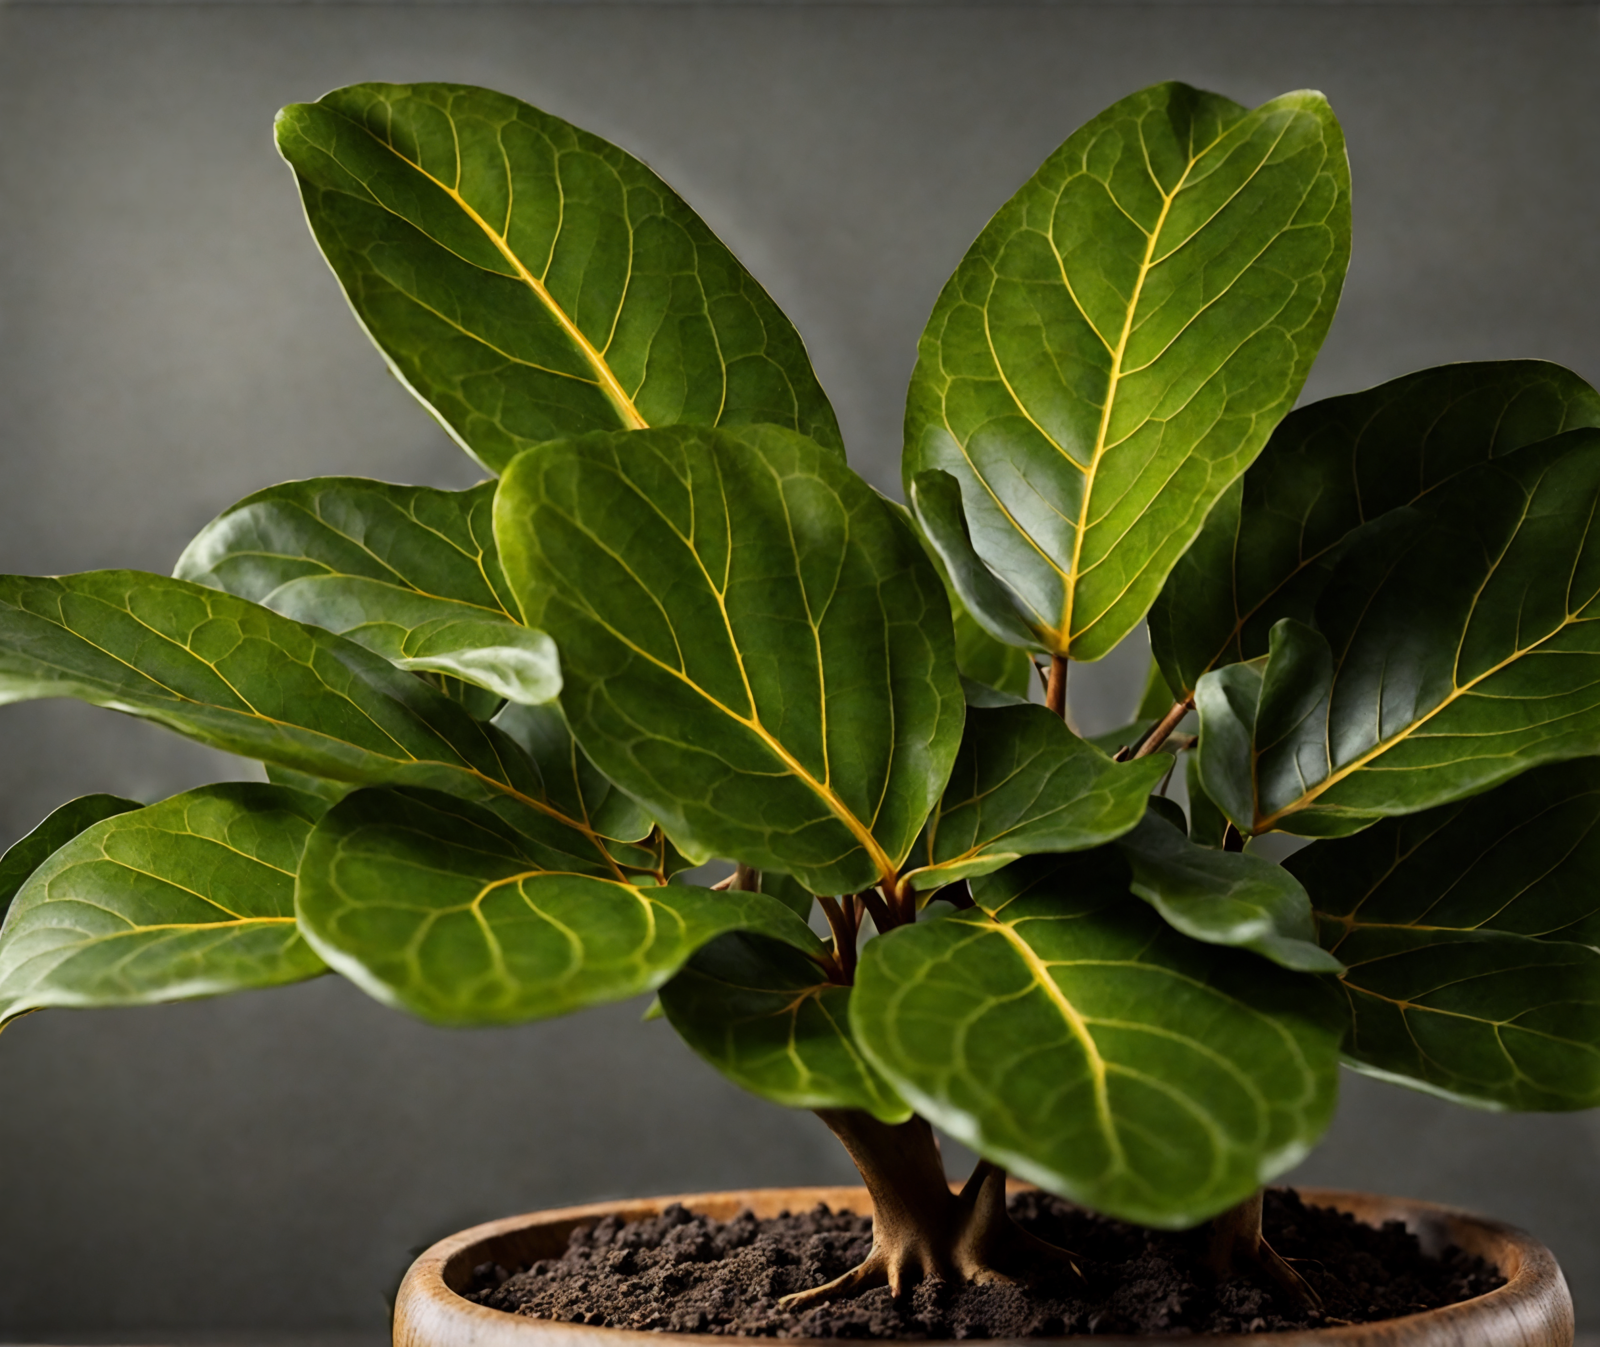 Ficus lyrata in a planter, with a leafy branch and tree form, in a well-lit room against a dark background.